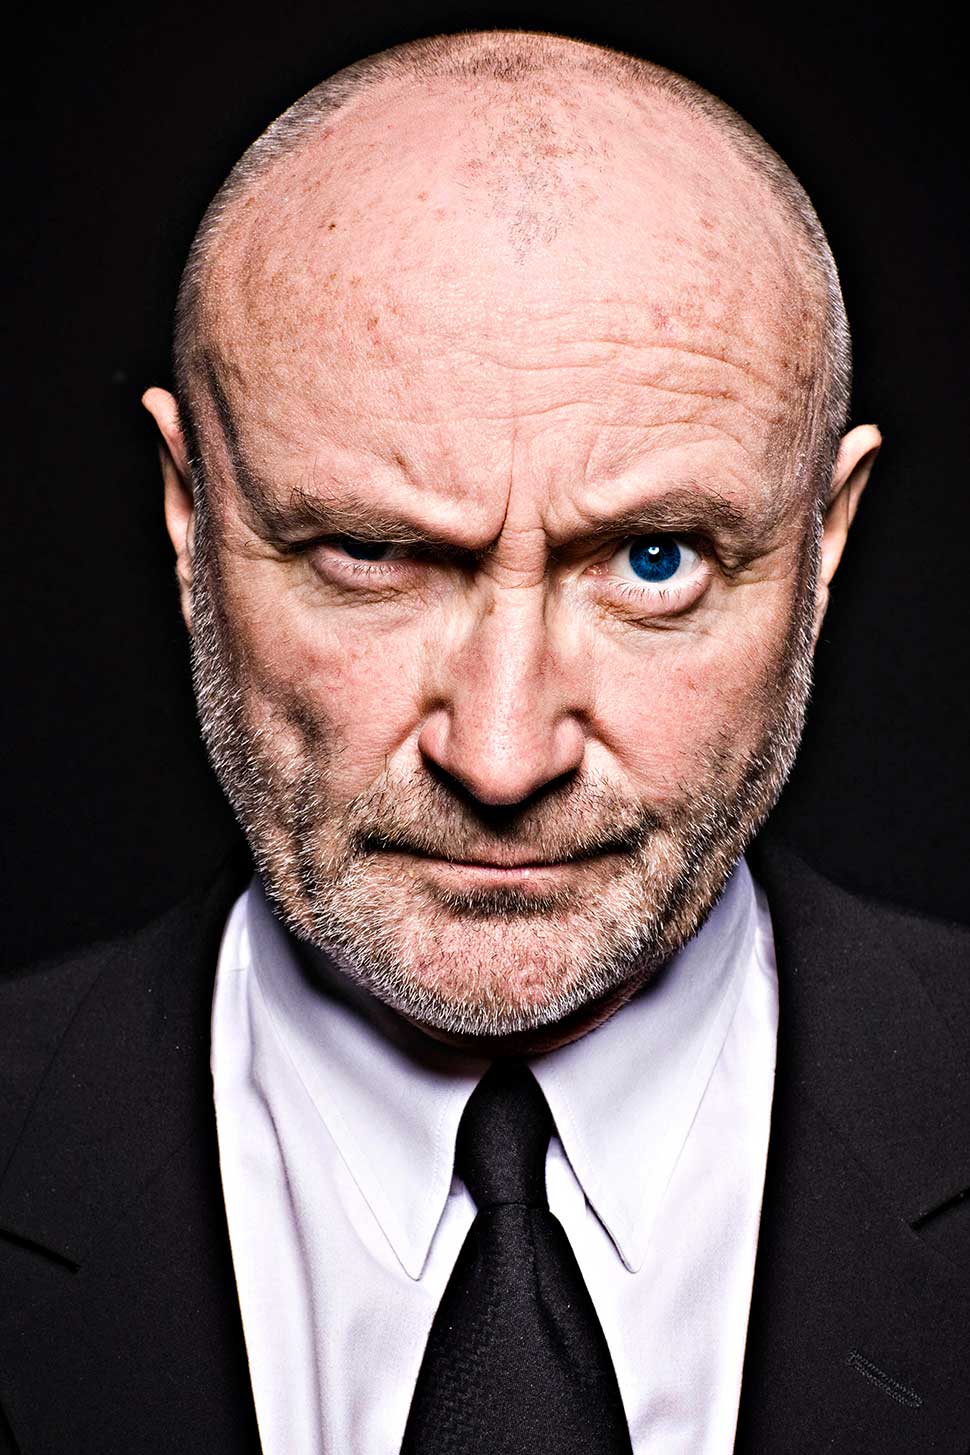 Phil Collins interview the Live Aid fiasco, going solo, and coping